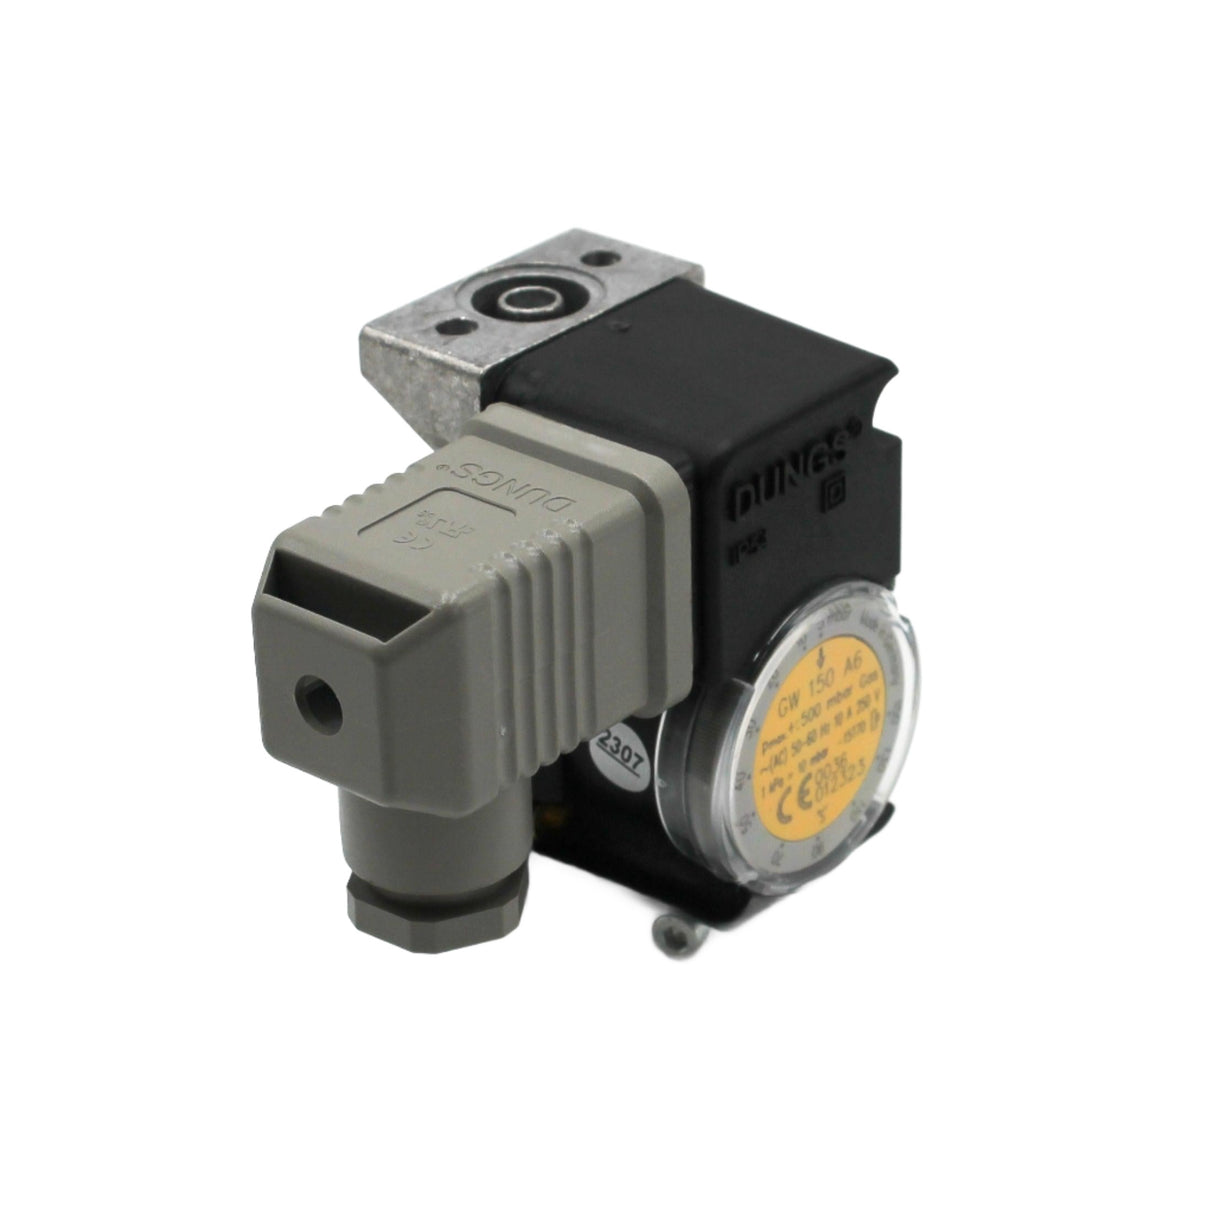 Dungs GW150 A6 5-150mbar Compact Pressure Switch